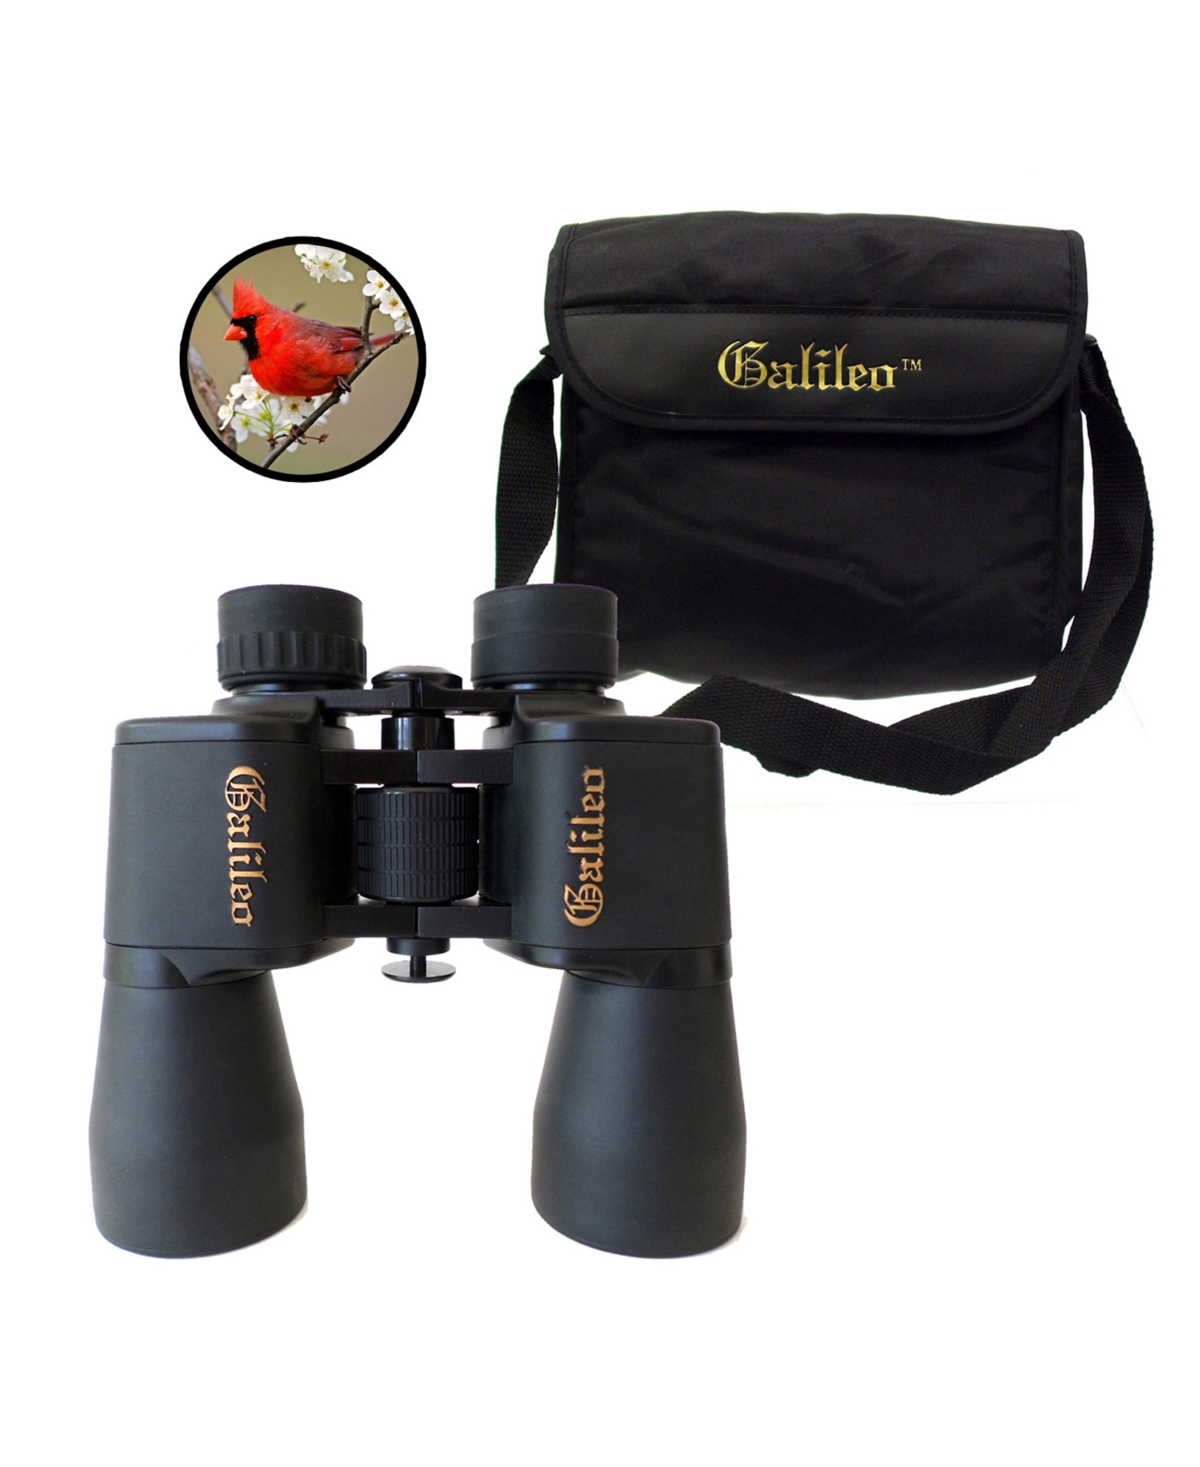 Cosmo Brands Galileo 8 Power Wide Angle Binocular With 40 Mm Lenses, Case And Shoulder Strap In Black